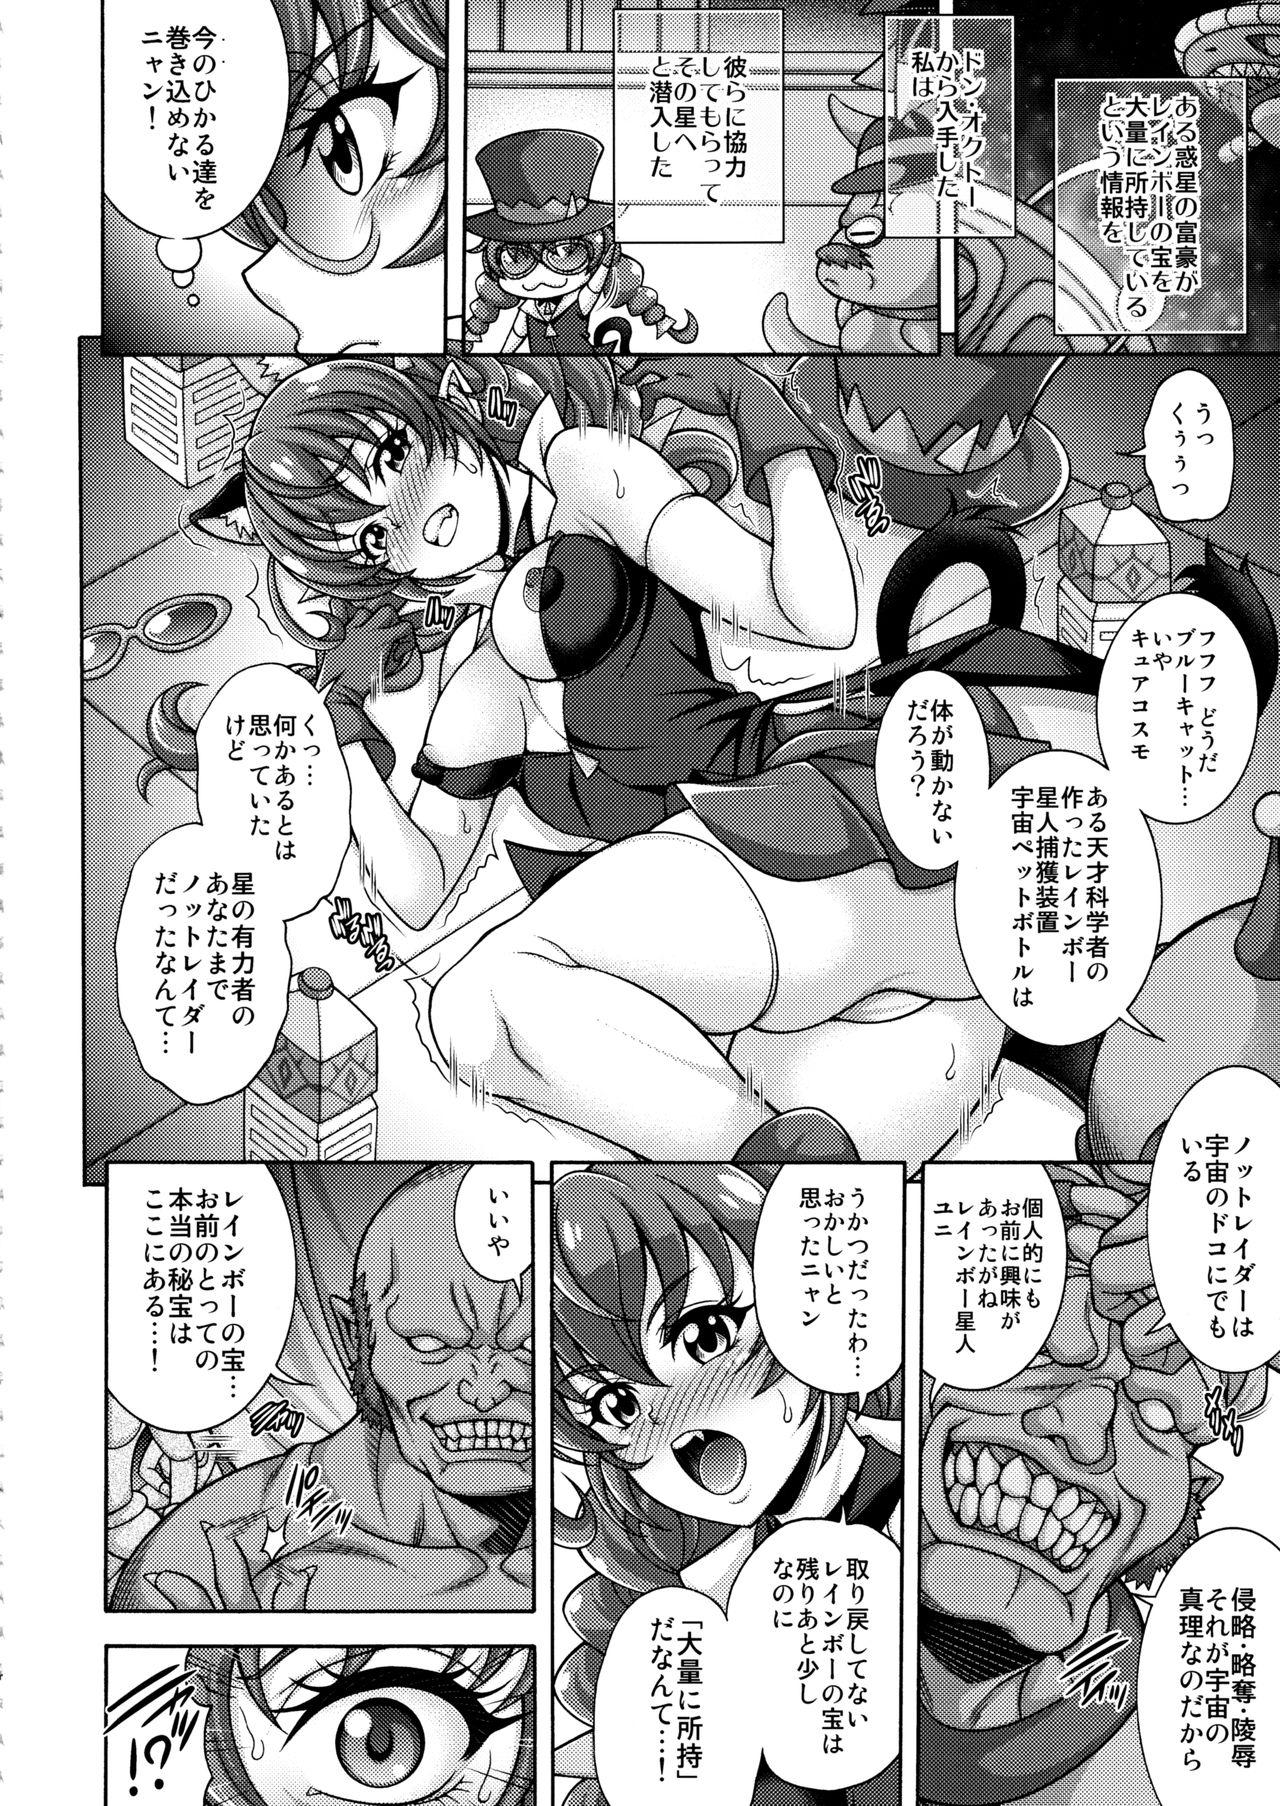 Bisex Harameite Ginga - Star twinkle precure Eurobabe - Page 3